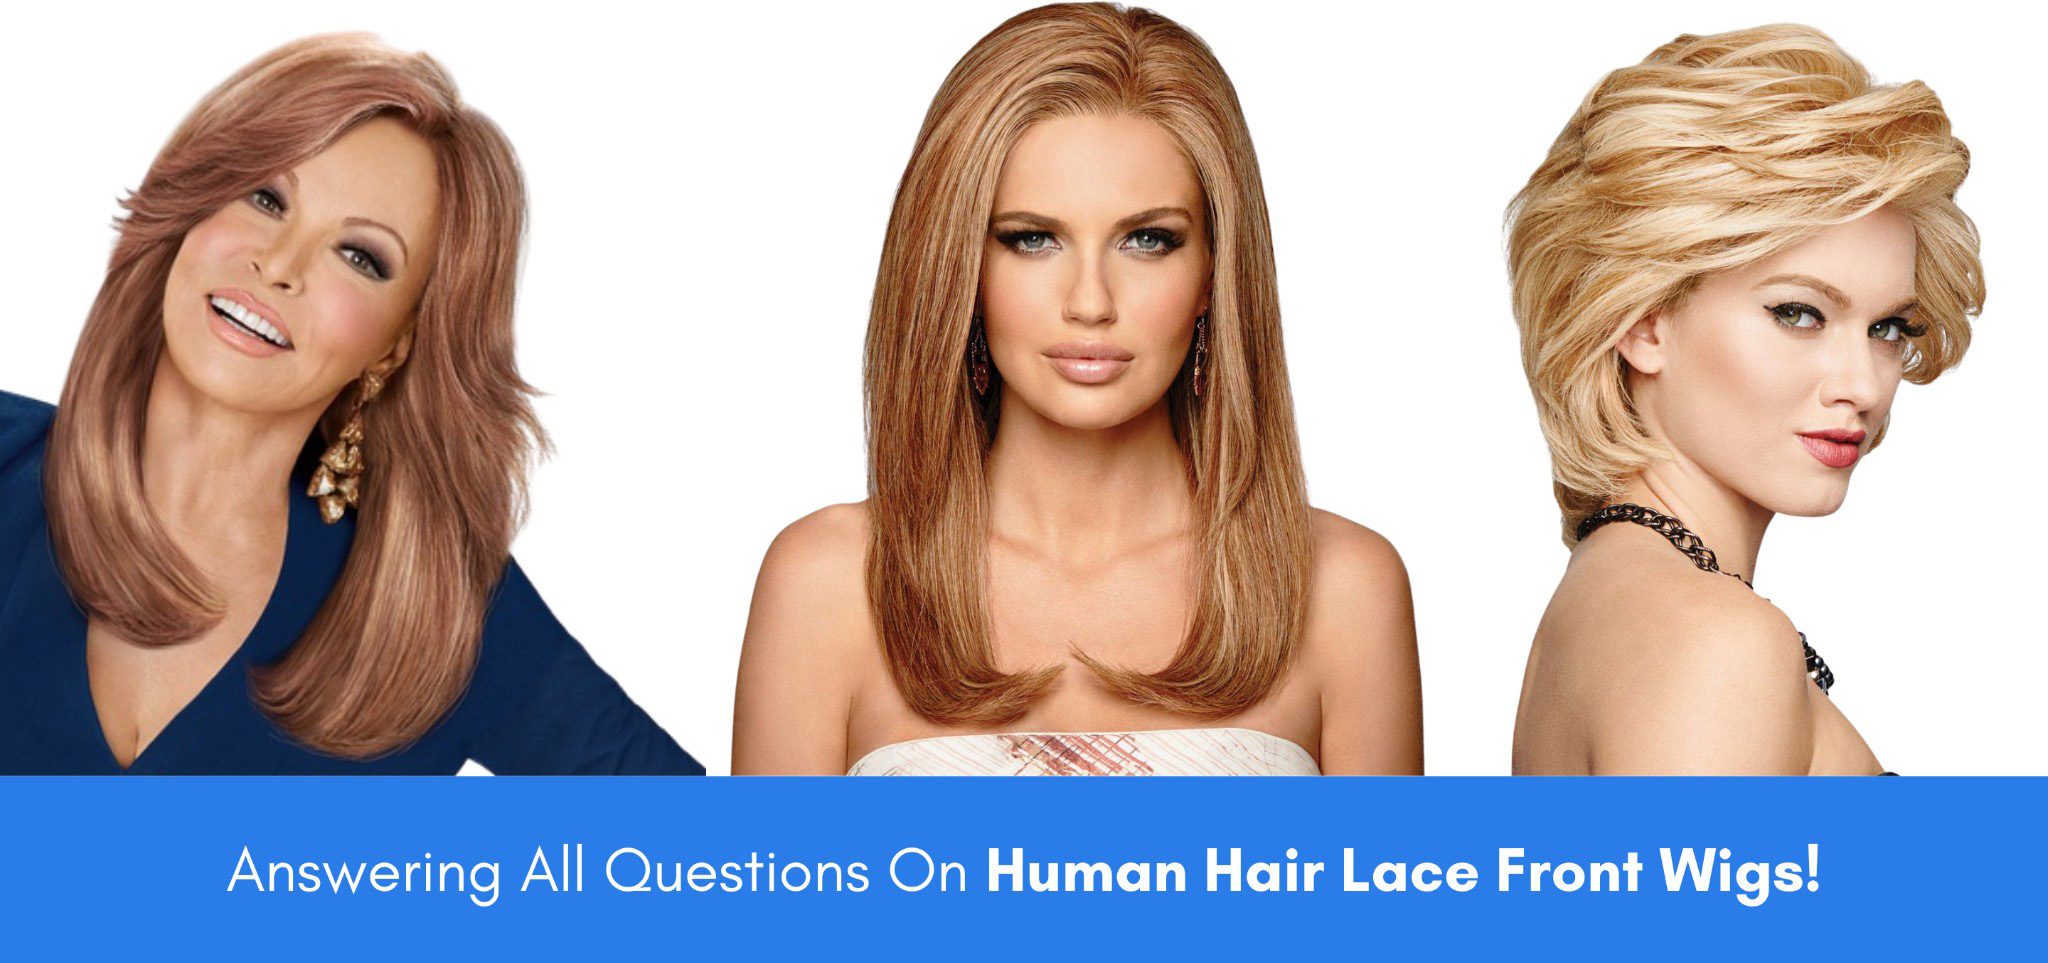 Answering All Questions On Human Hair Lace Front Wigs!